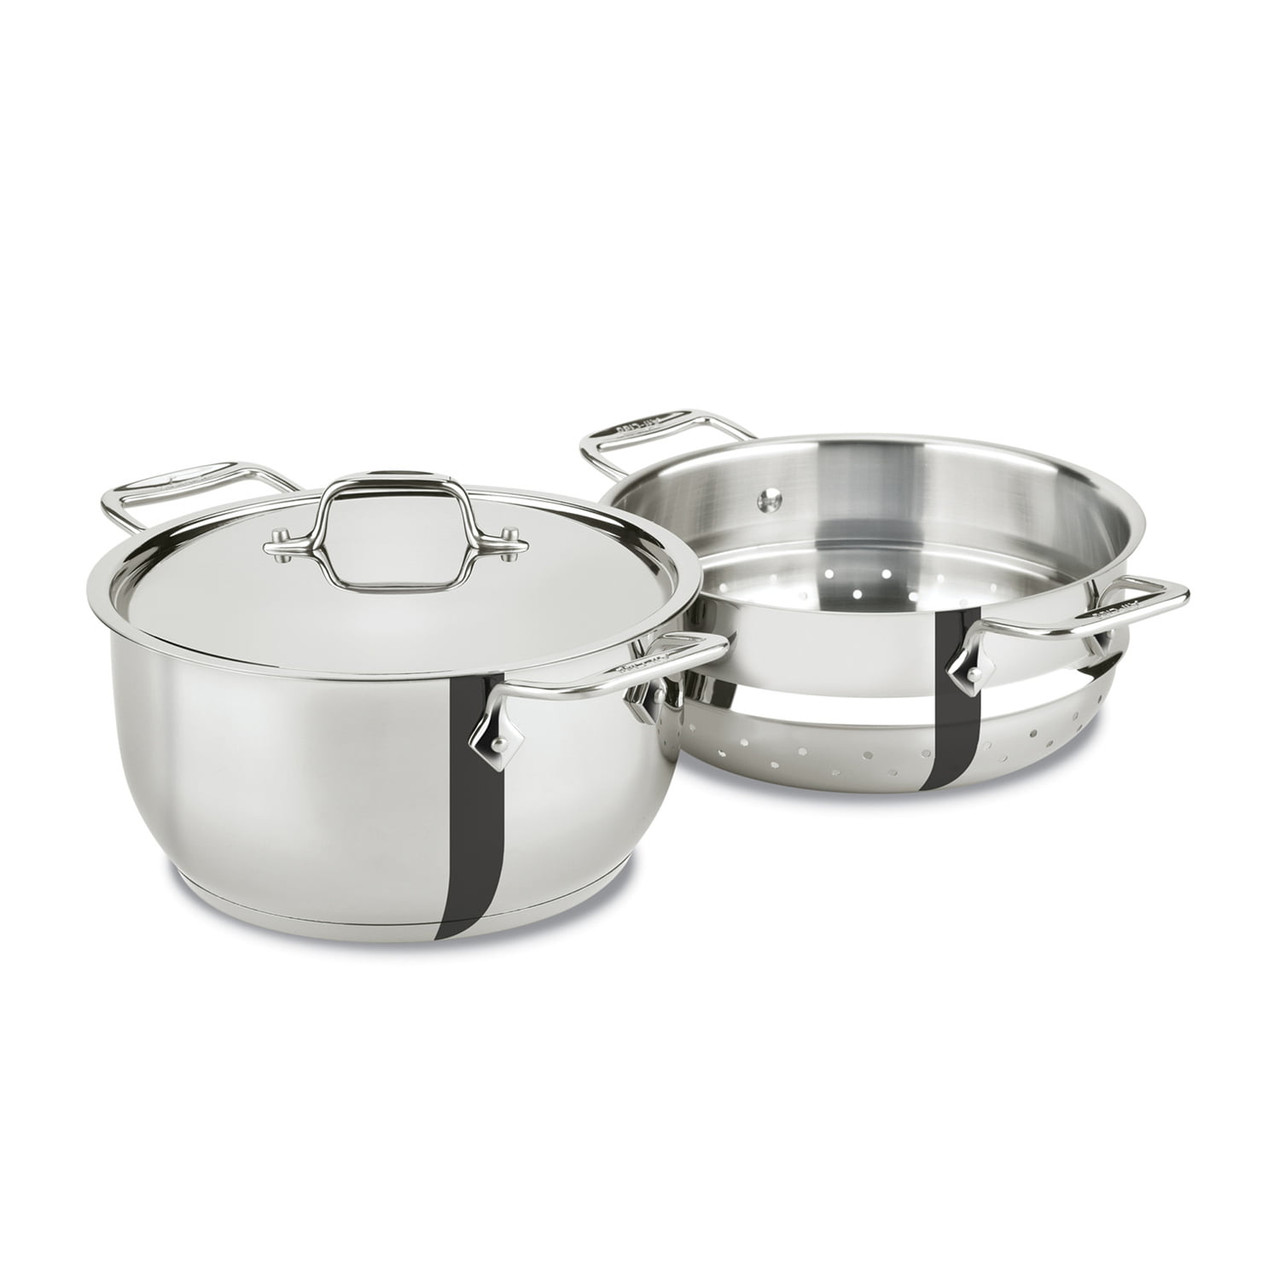 https://cdn11.bigcommerce.com/s-hccytny0od/images/stencil/1280x1280/products/4028/14835/all-clad-stainless-steel-steamer-1__73820.1620171136.jpg?c=2?imbypass=on